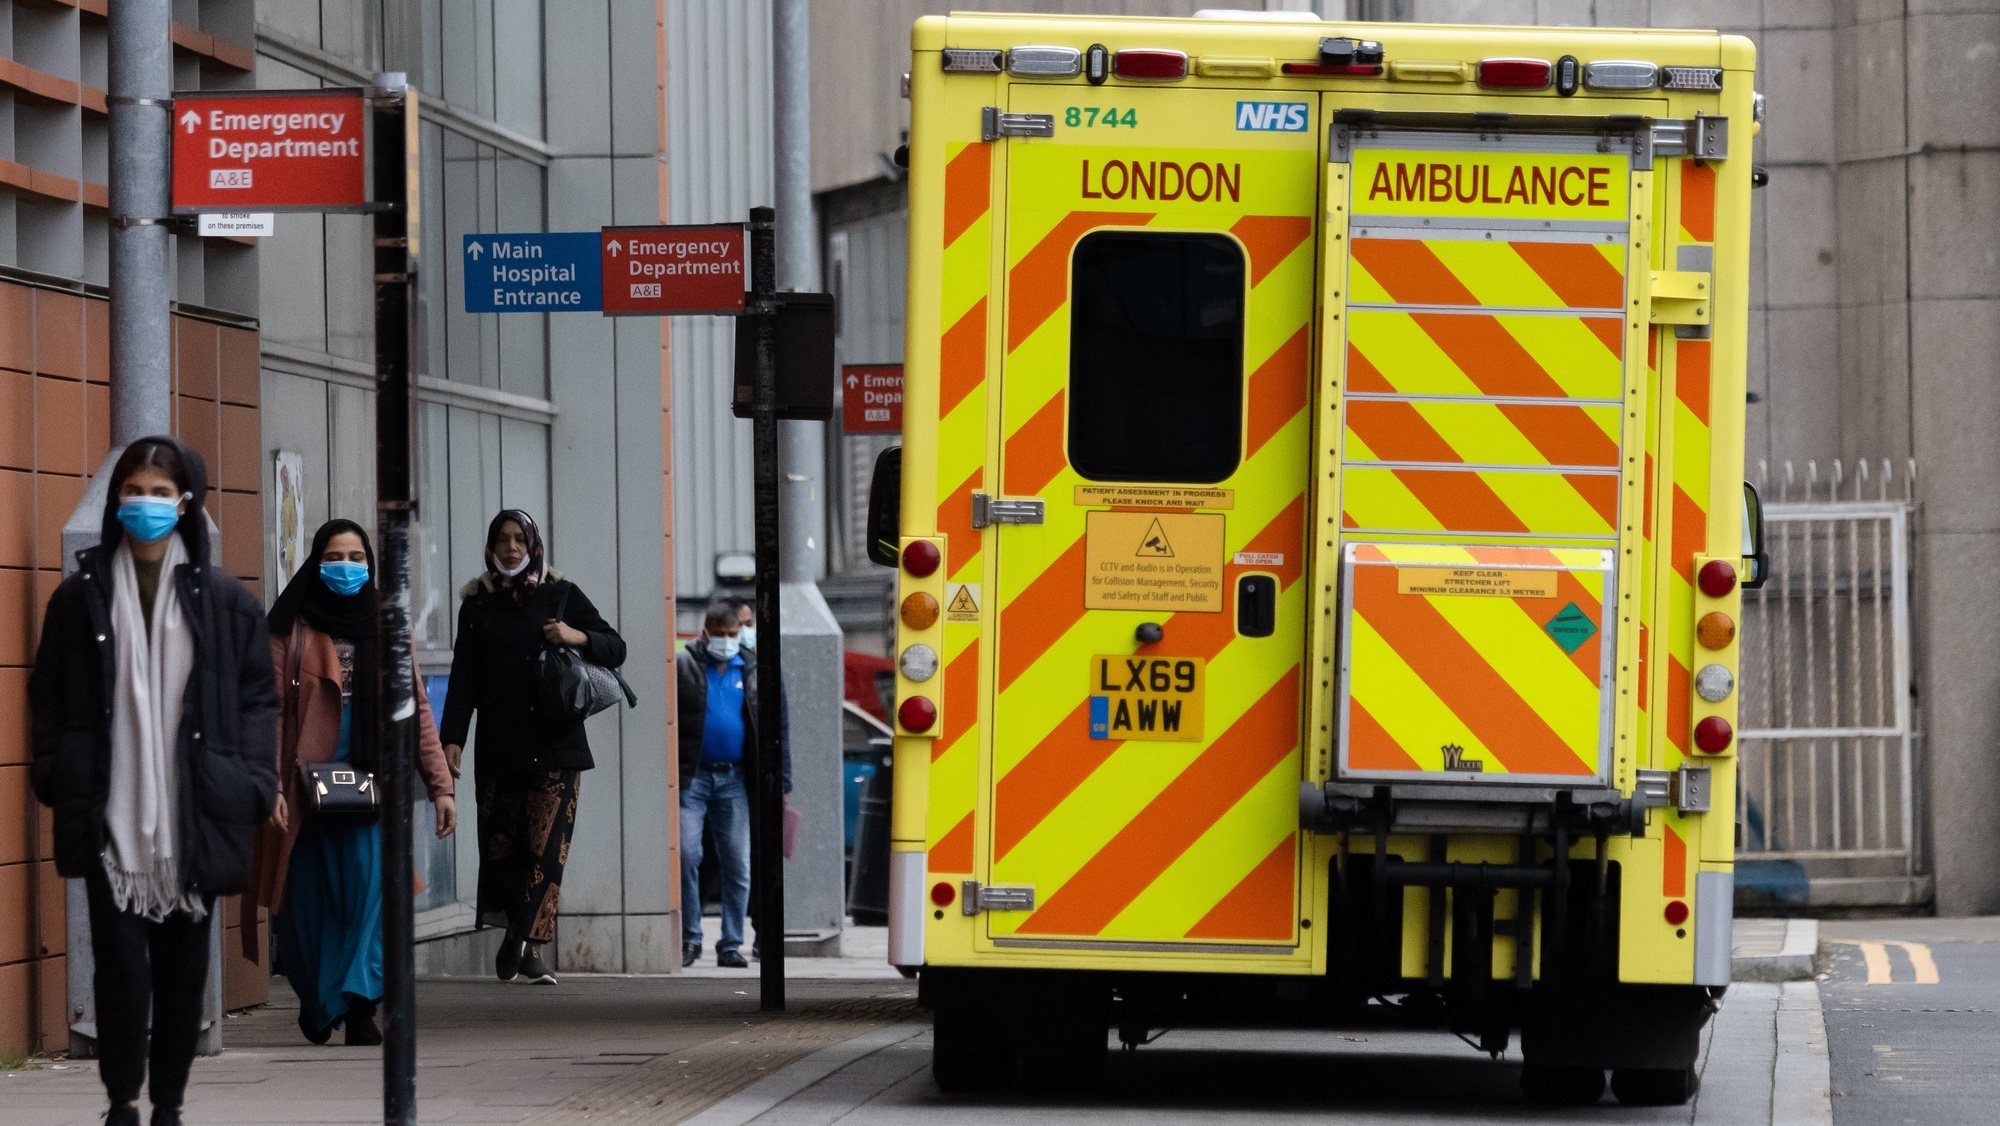 epa09660475 An ambulance stands outside the Royal London Hospital in London, Britain, 30 December 2021. According to data released by the UK Health Security Agency (UKHSA) on 29 December, 183,037 new COVID-19 cases and 57 deaths in 28 days of a positive test were reported in the UK. COVID-19 cases continue to rise in Britain putting increased pressure on hospitals and National Health Service (NHS) staffing levels.  EPA/VICKIE FLORES